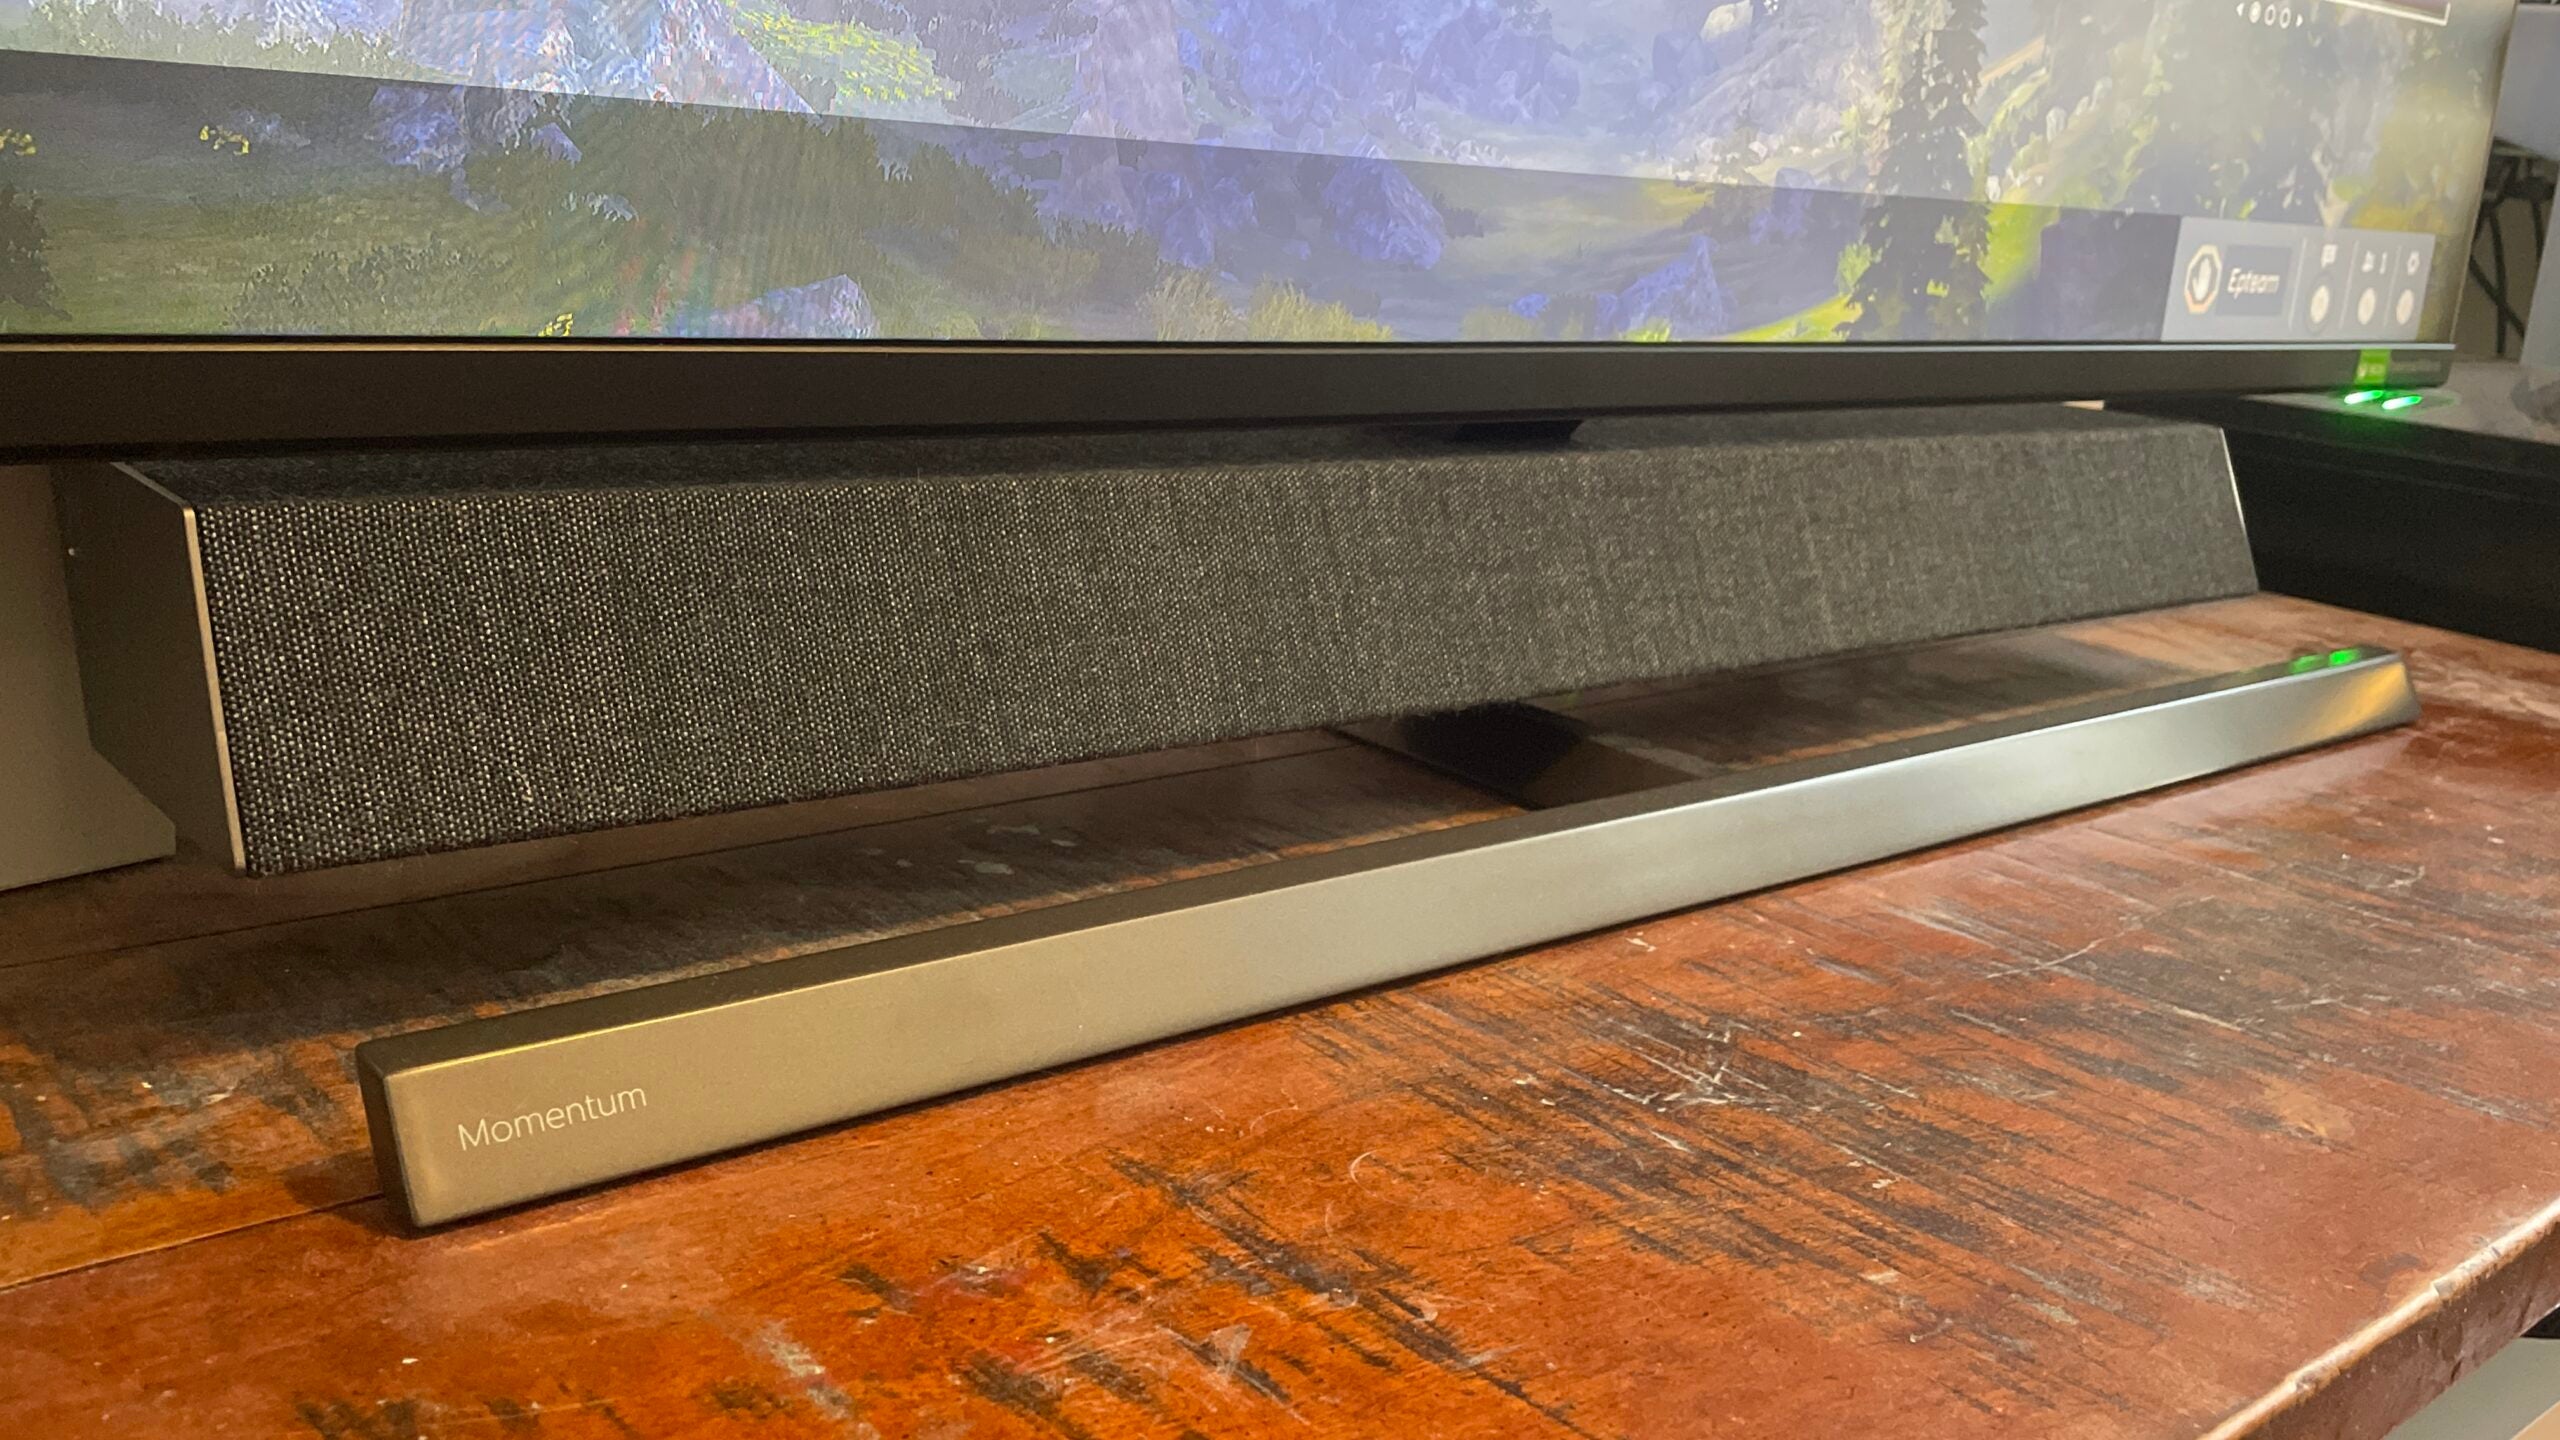 Close up of the Philips Momentum monitor's built-in Bowers & Wilkins soundbar